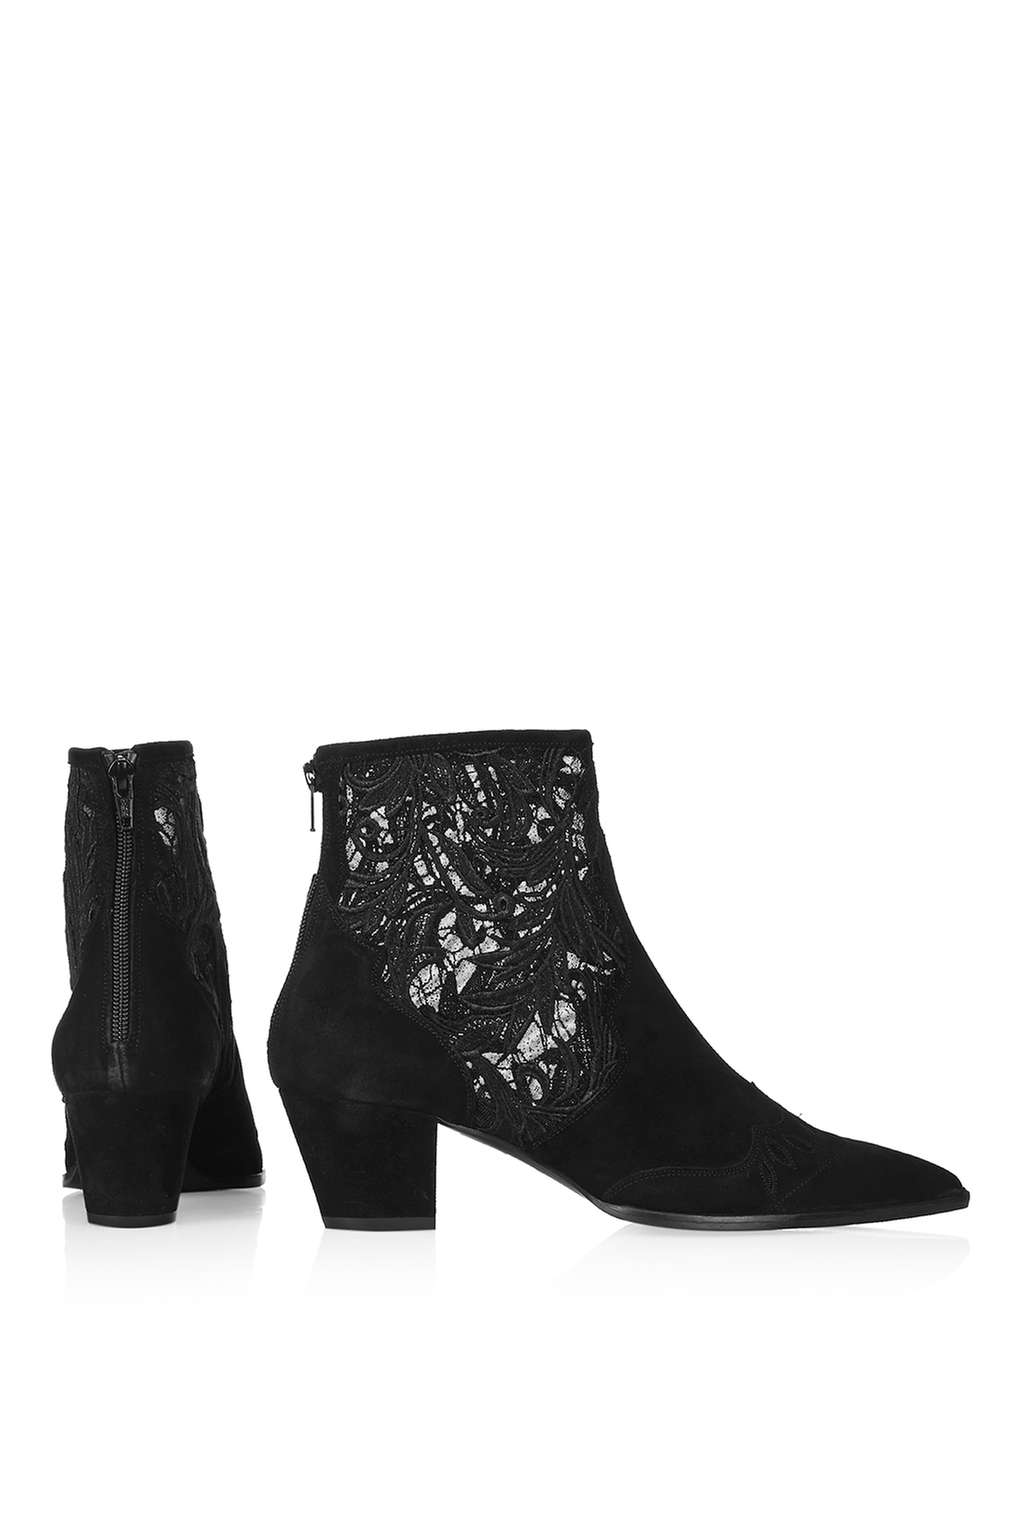 Topshop ALEGRA Ankle boots